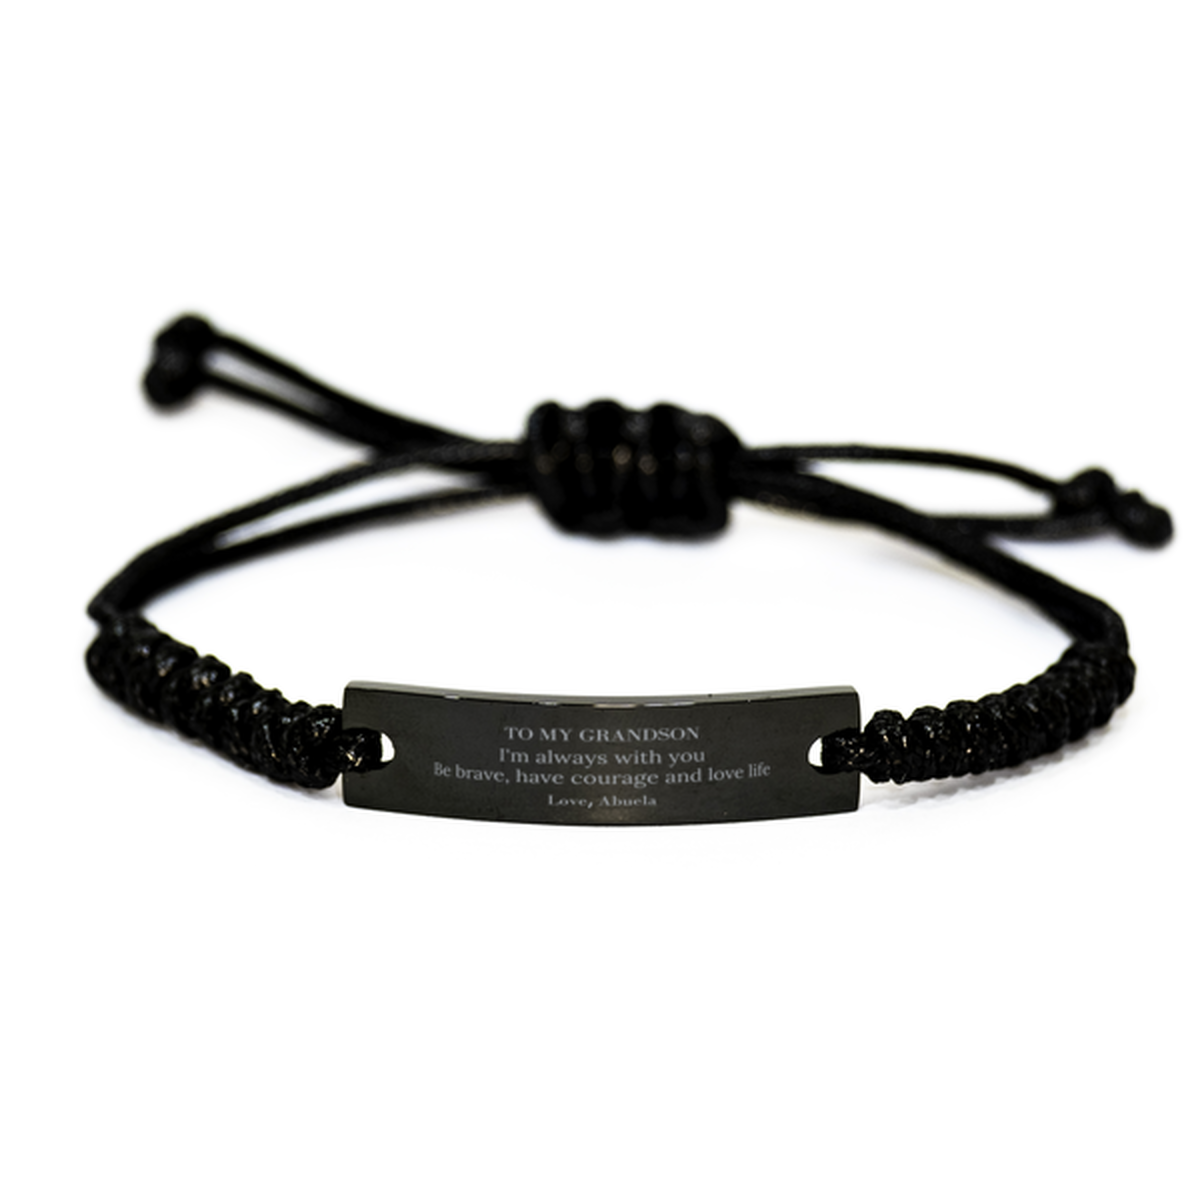 To My Grandson Gifts from Abuela, Unique Black Rope Bracelet Inspirational Christmas Birthday Graduation Gifts for Grandson I'm always with you. Be brave, have courage and love life. Love, Abuela